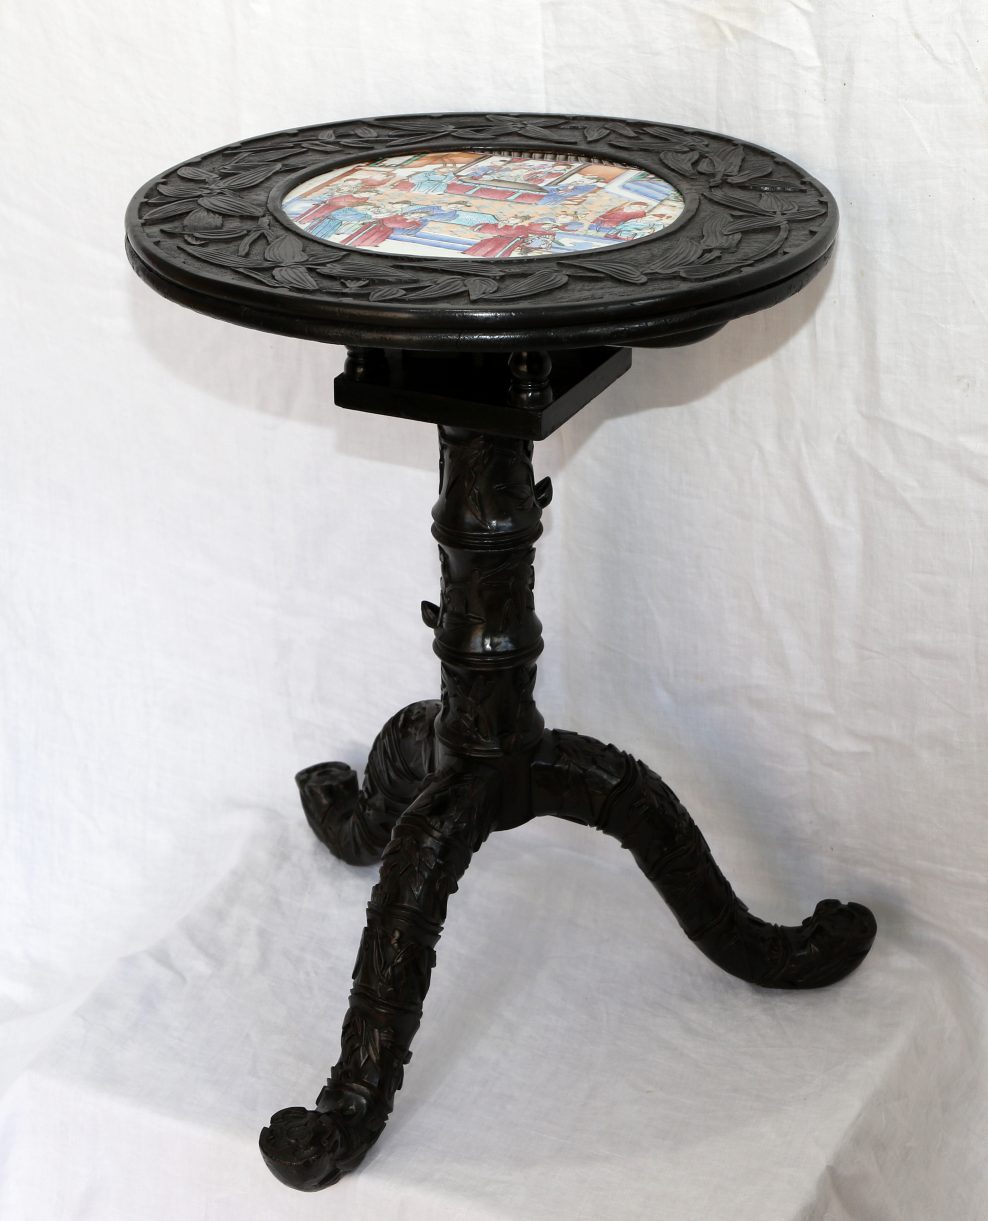 Chinese ebonised and lacquered tripod table with porcelain plaque